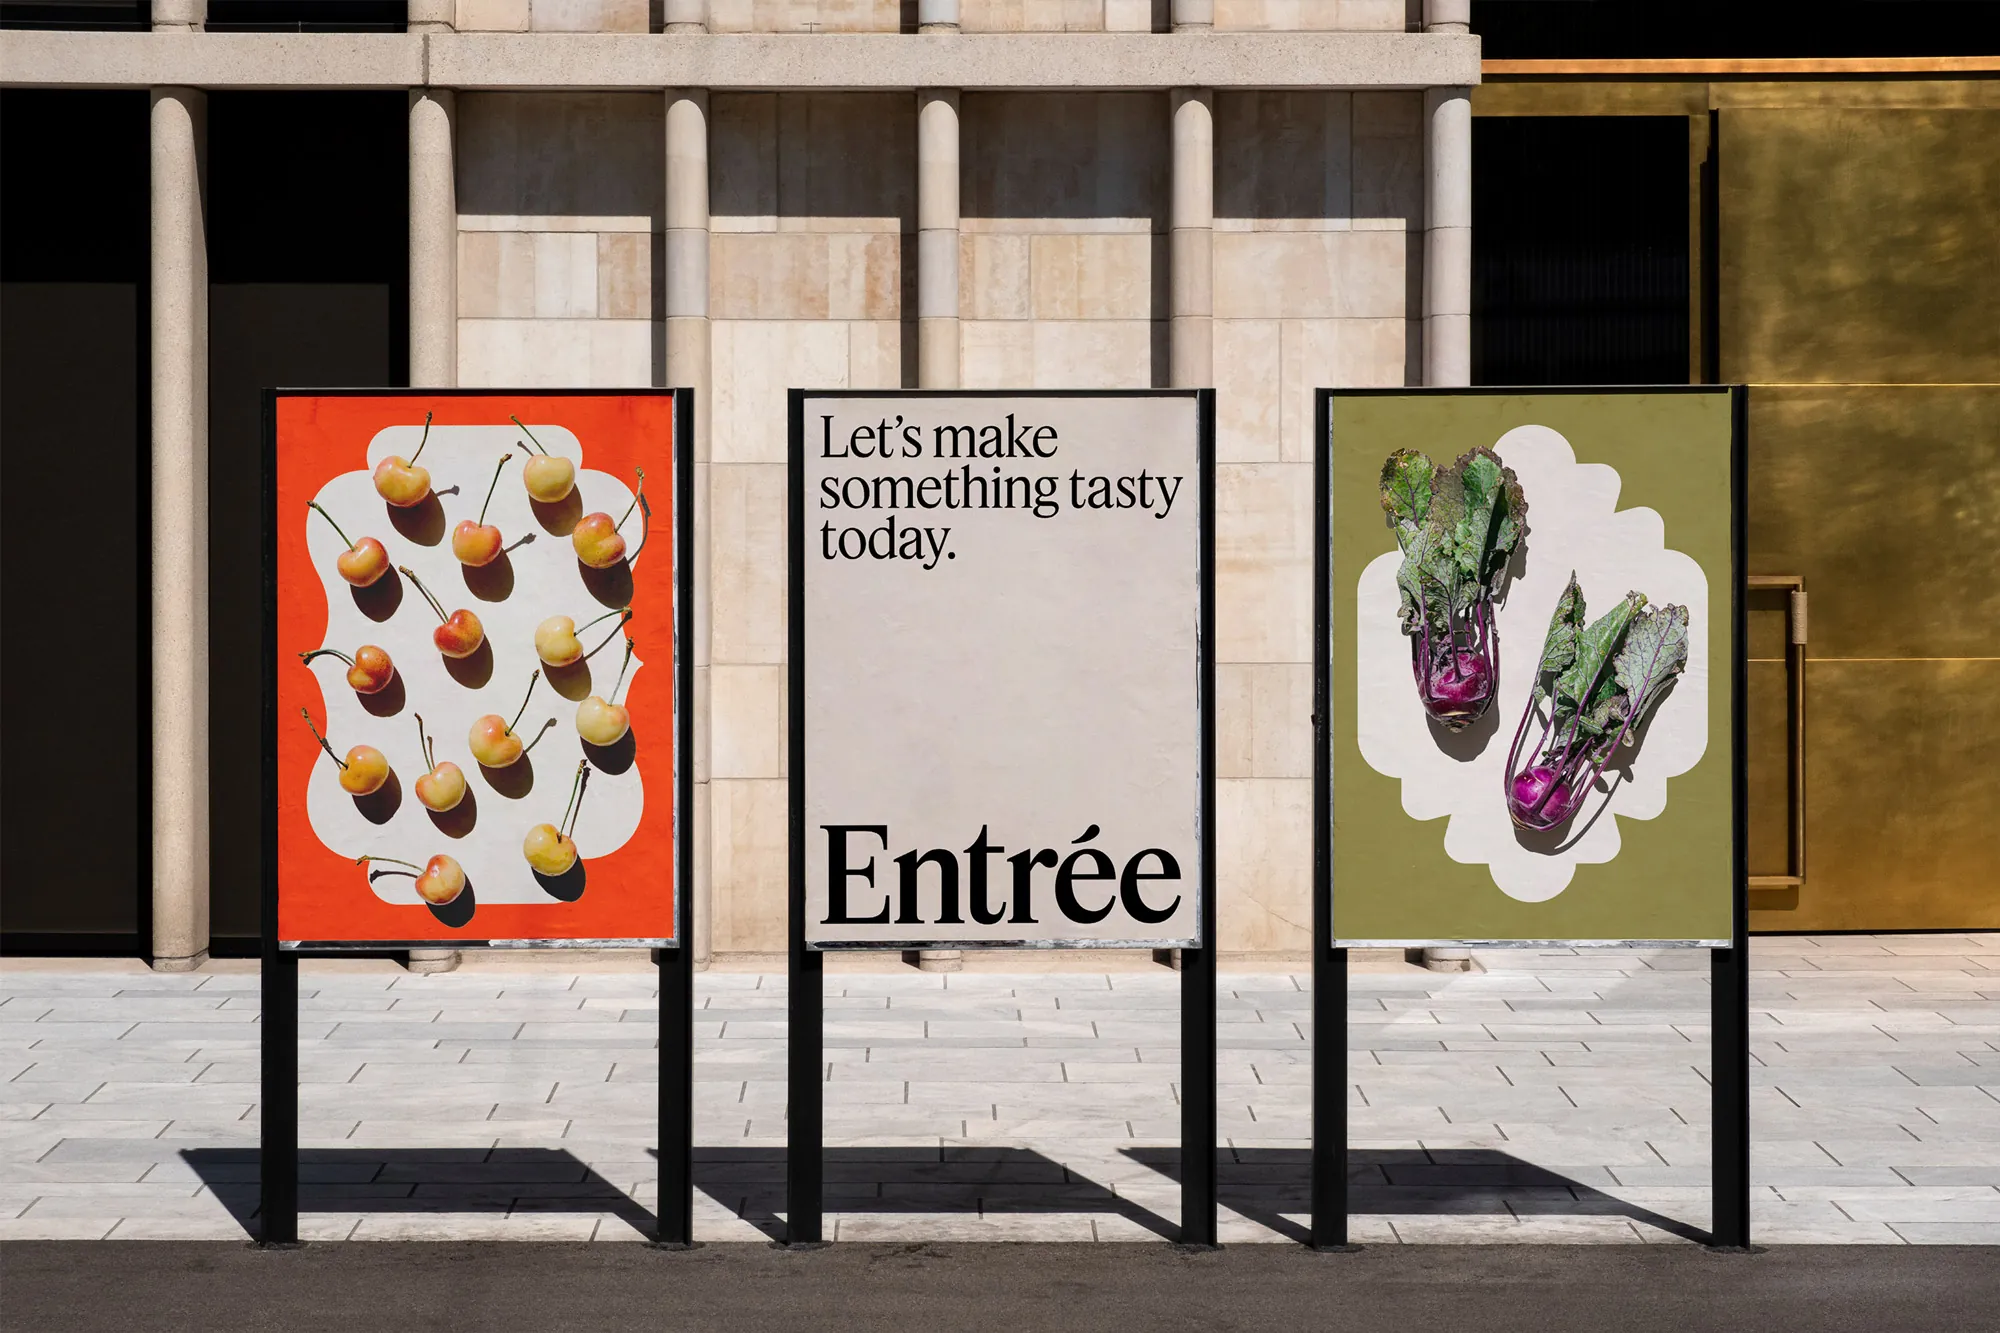 Logotype, brand identity and poster design by Saint Urbain for Chicago-based chef-made meal delivery business Entrée